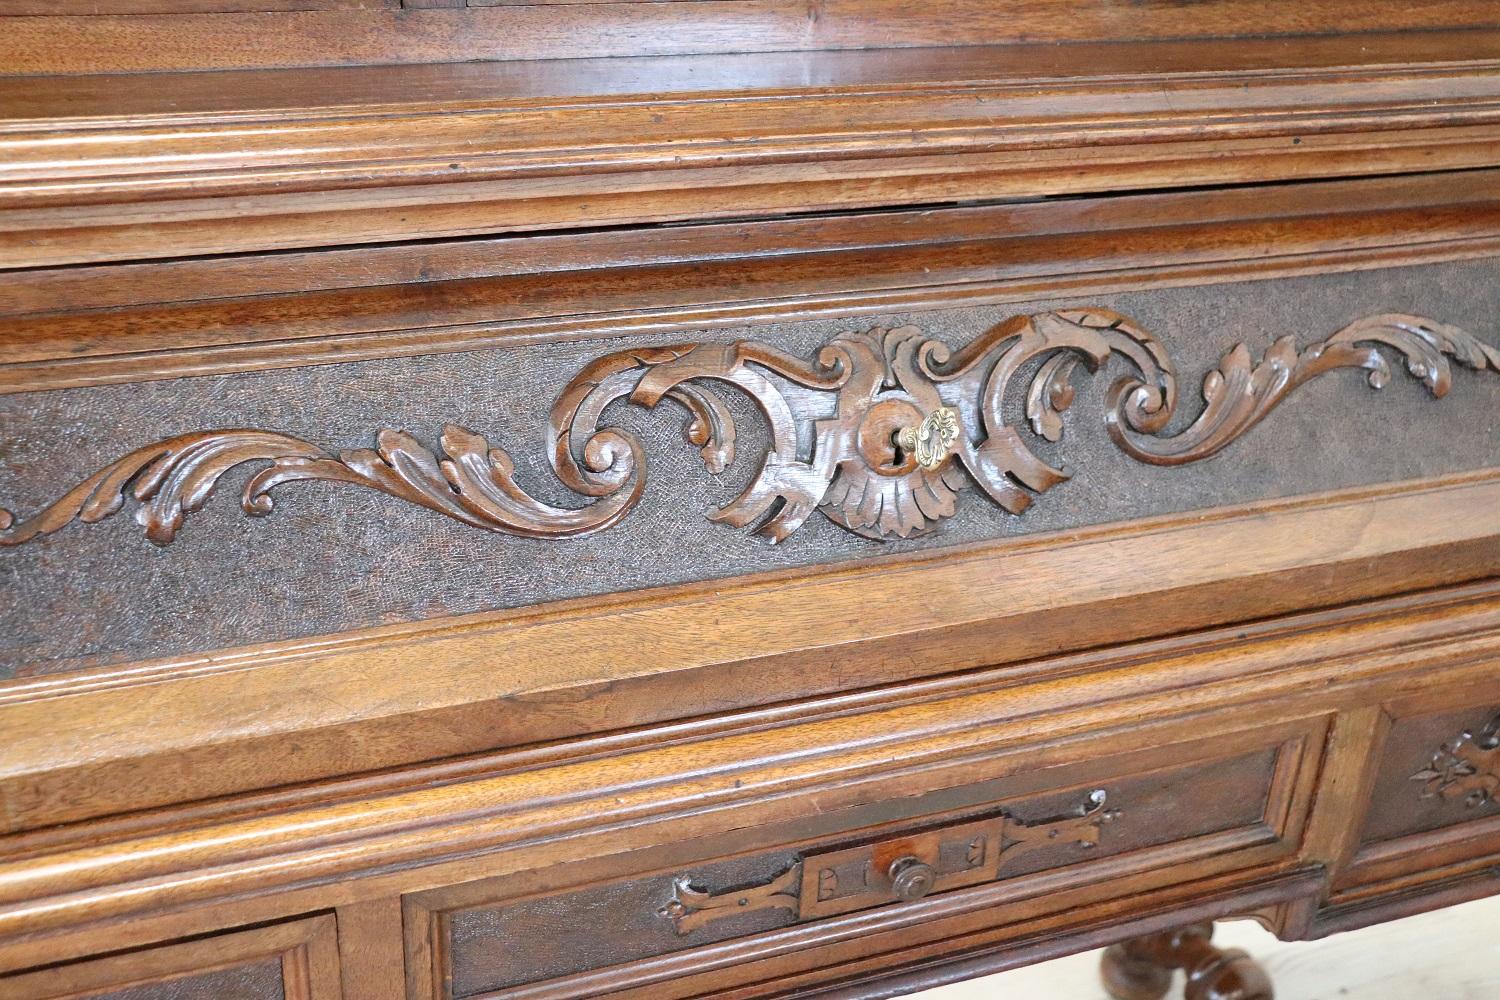 Late 19th Century 19th Century Italian Renaissance Style Carved Walnut Cabinet with Writing Desk